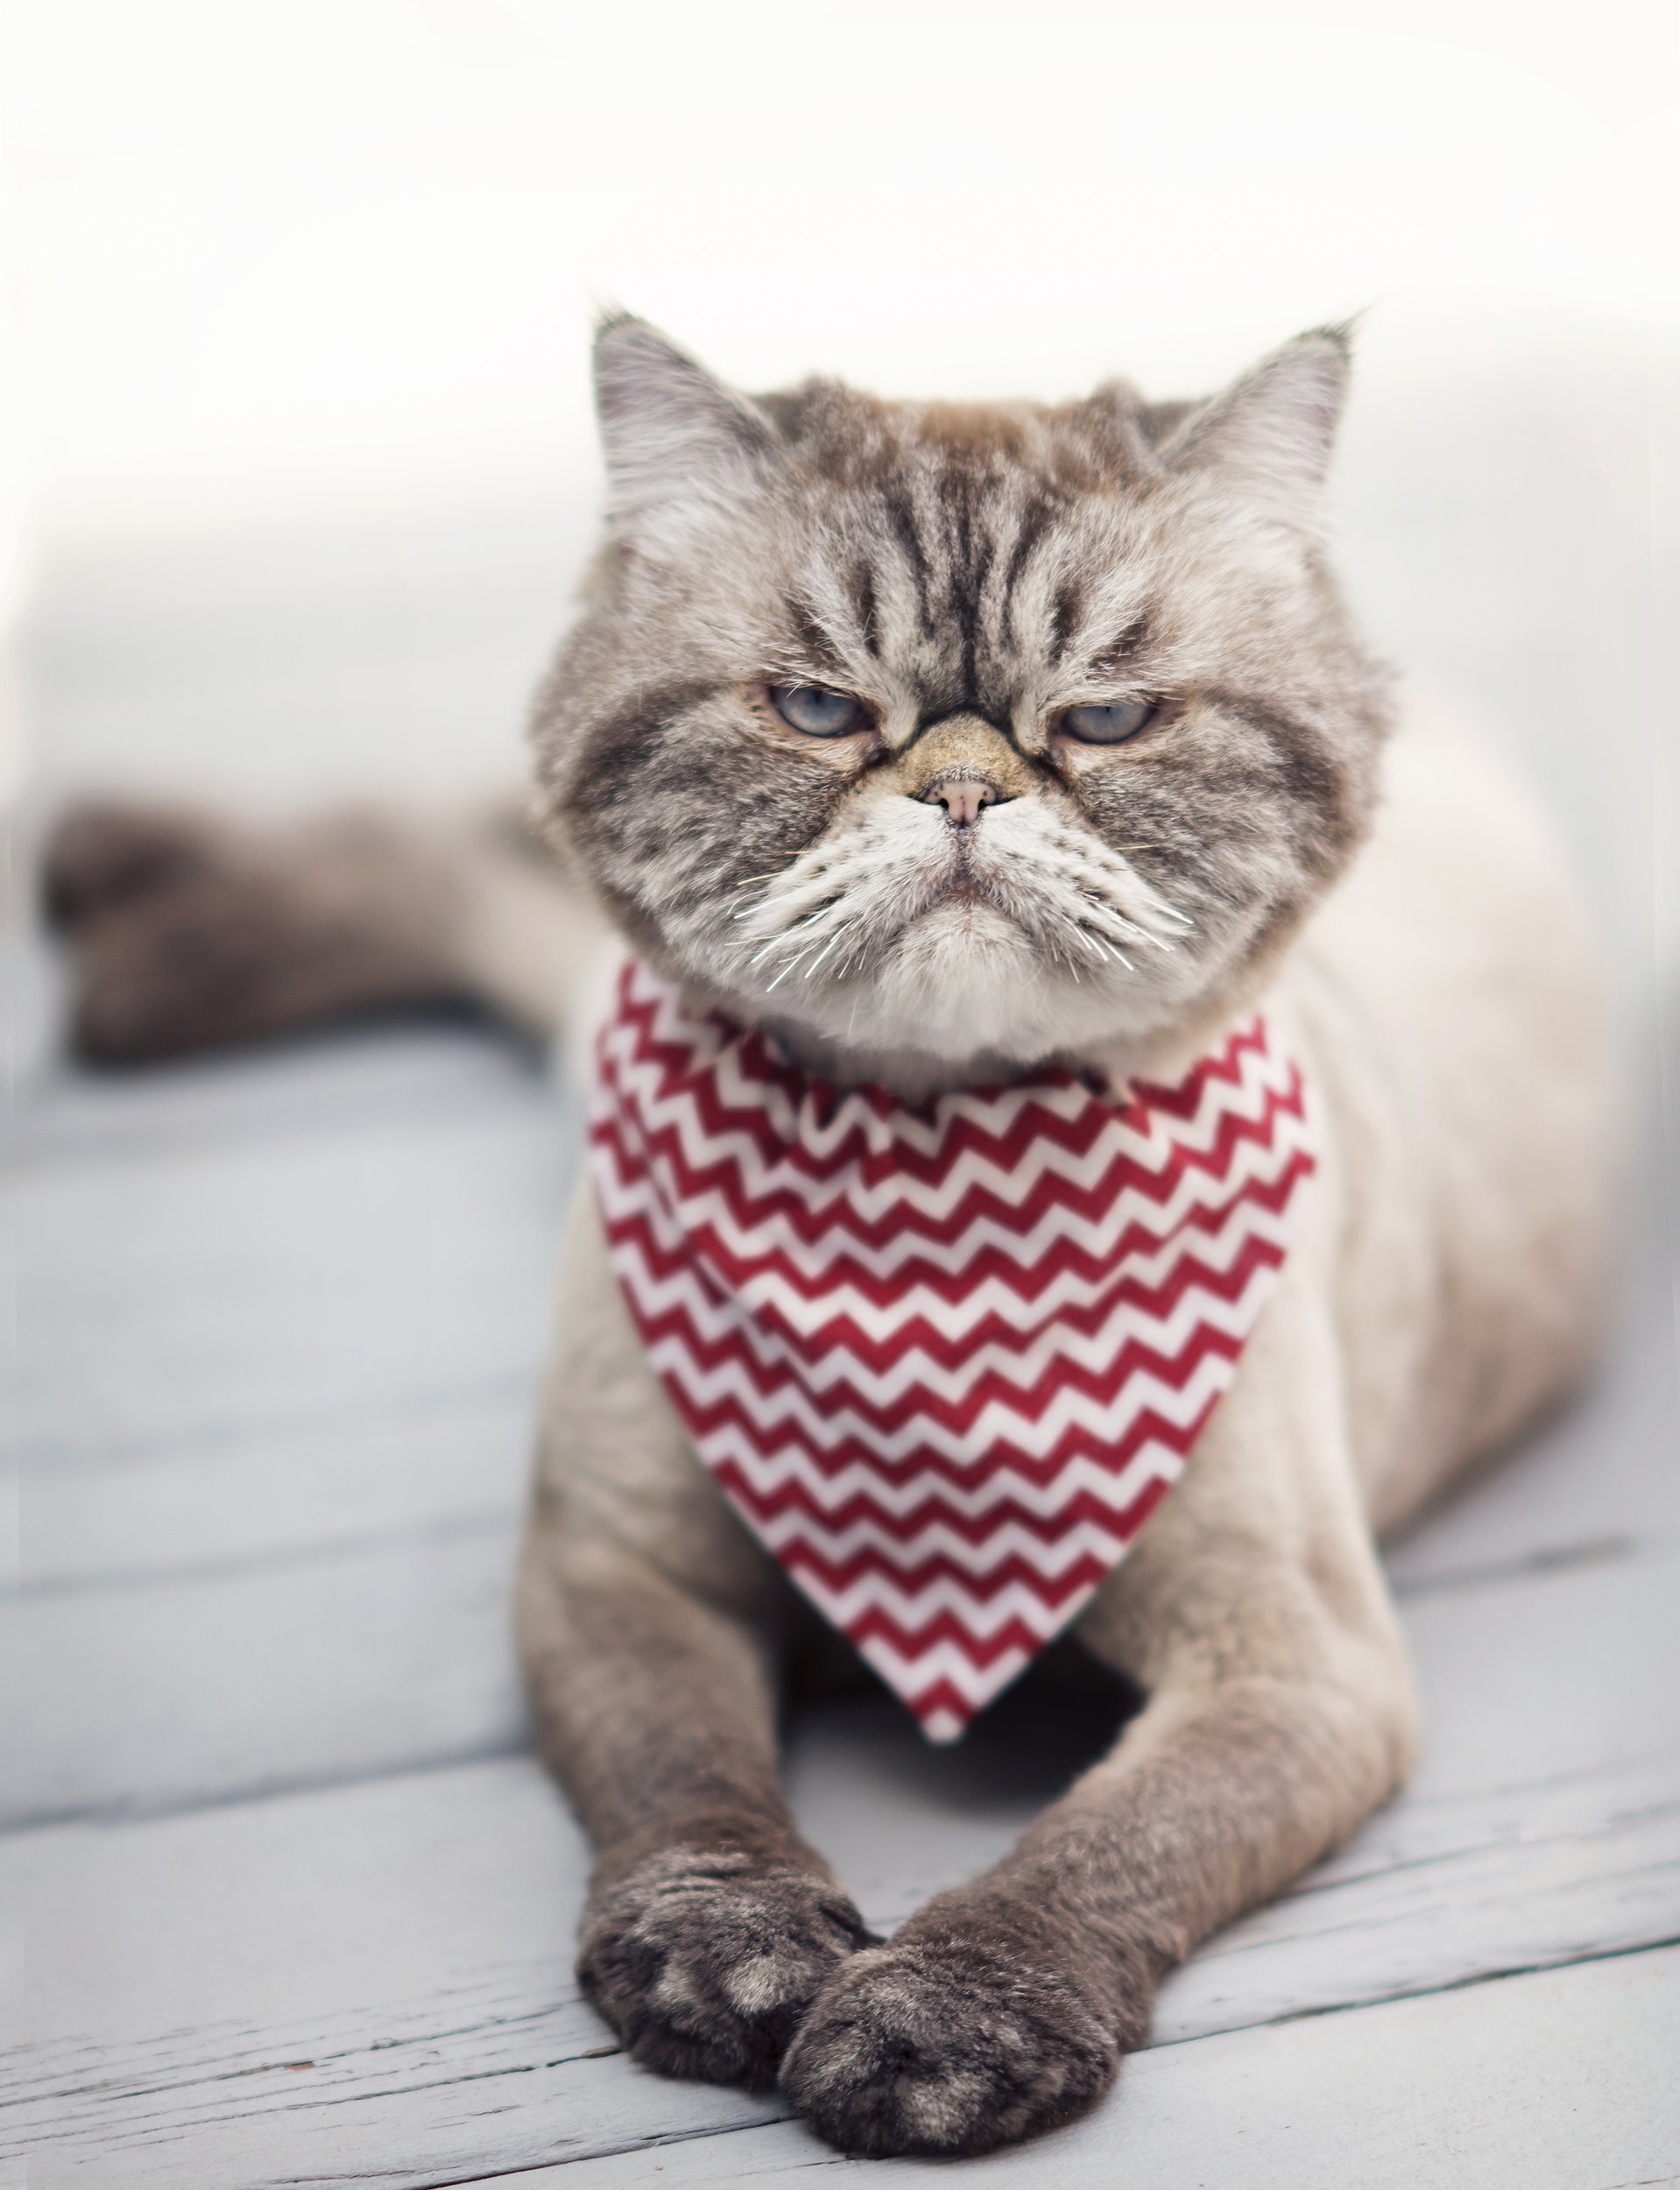 A photo of an annoyed cat. (Shutterstock Photo)